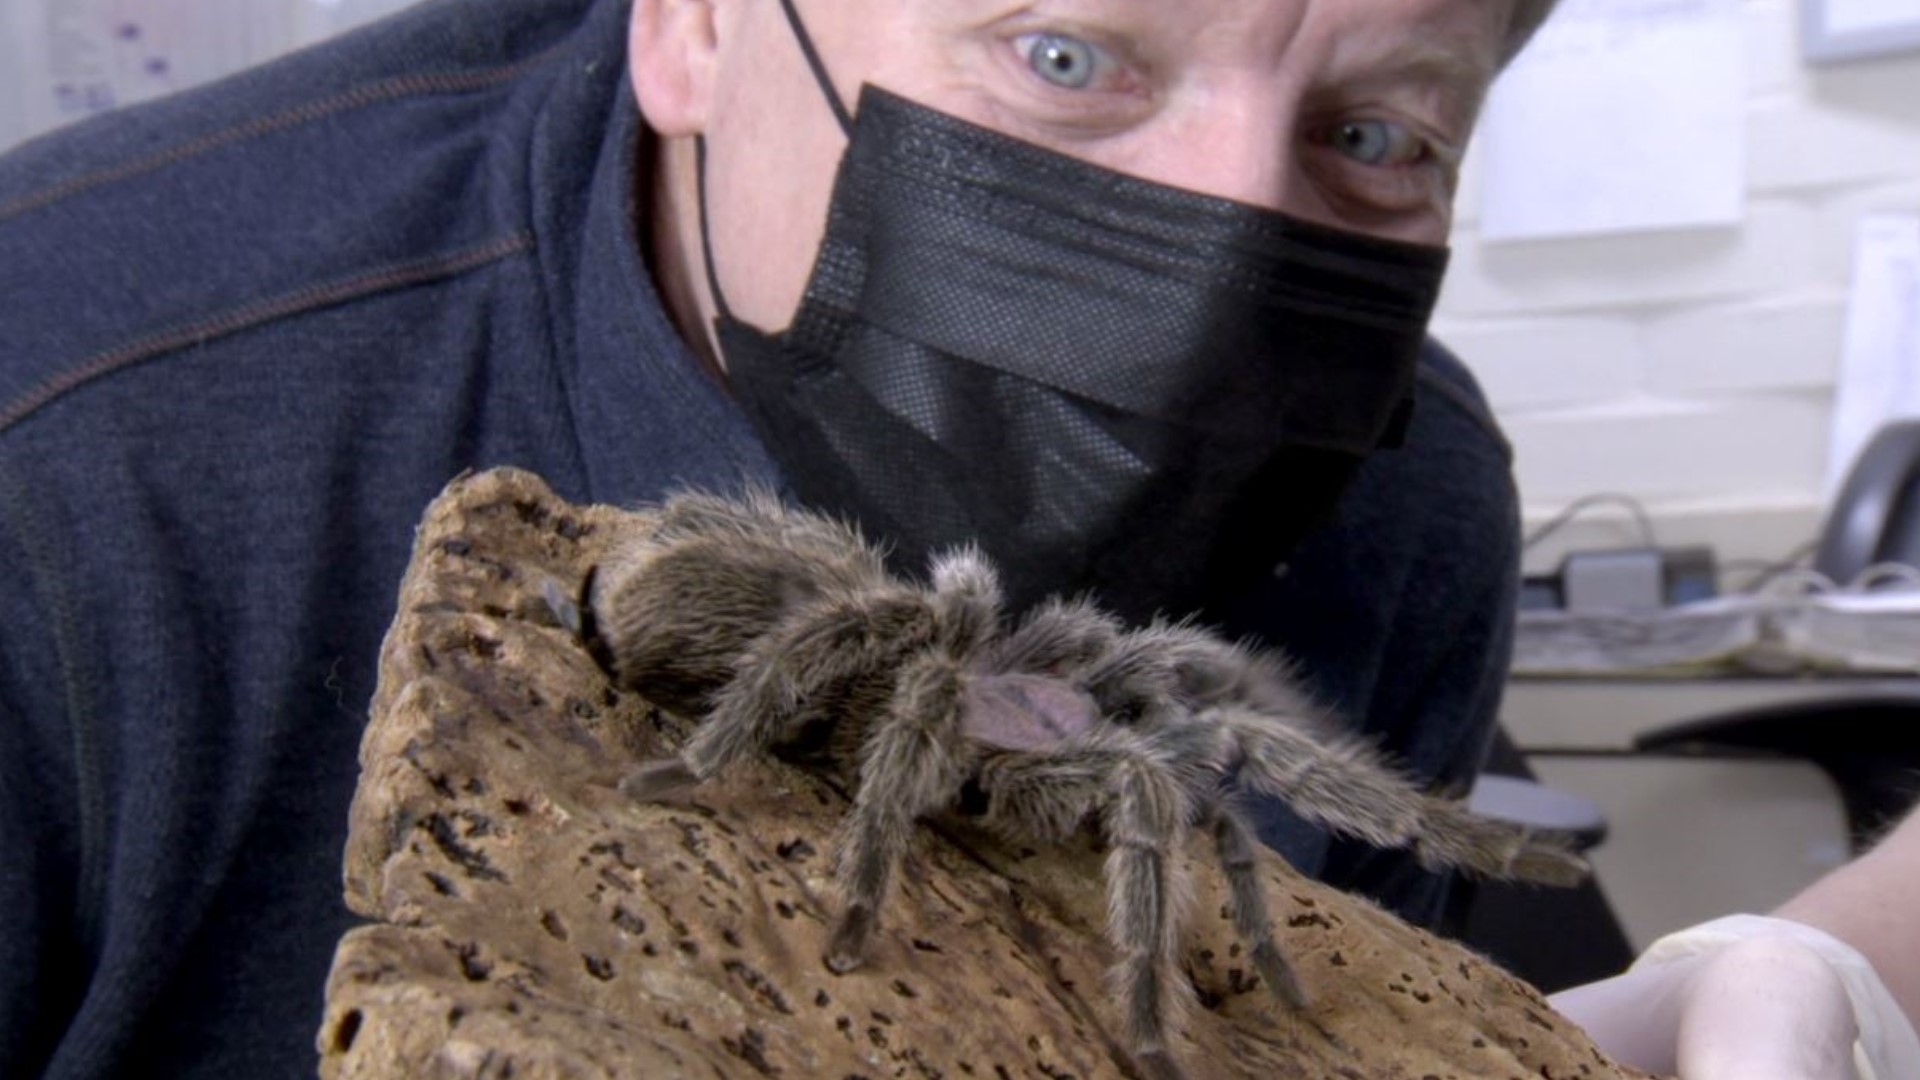 Woodland Park Zoo's spiders, bats and leeches set the record straight. #k5evening